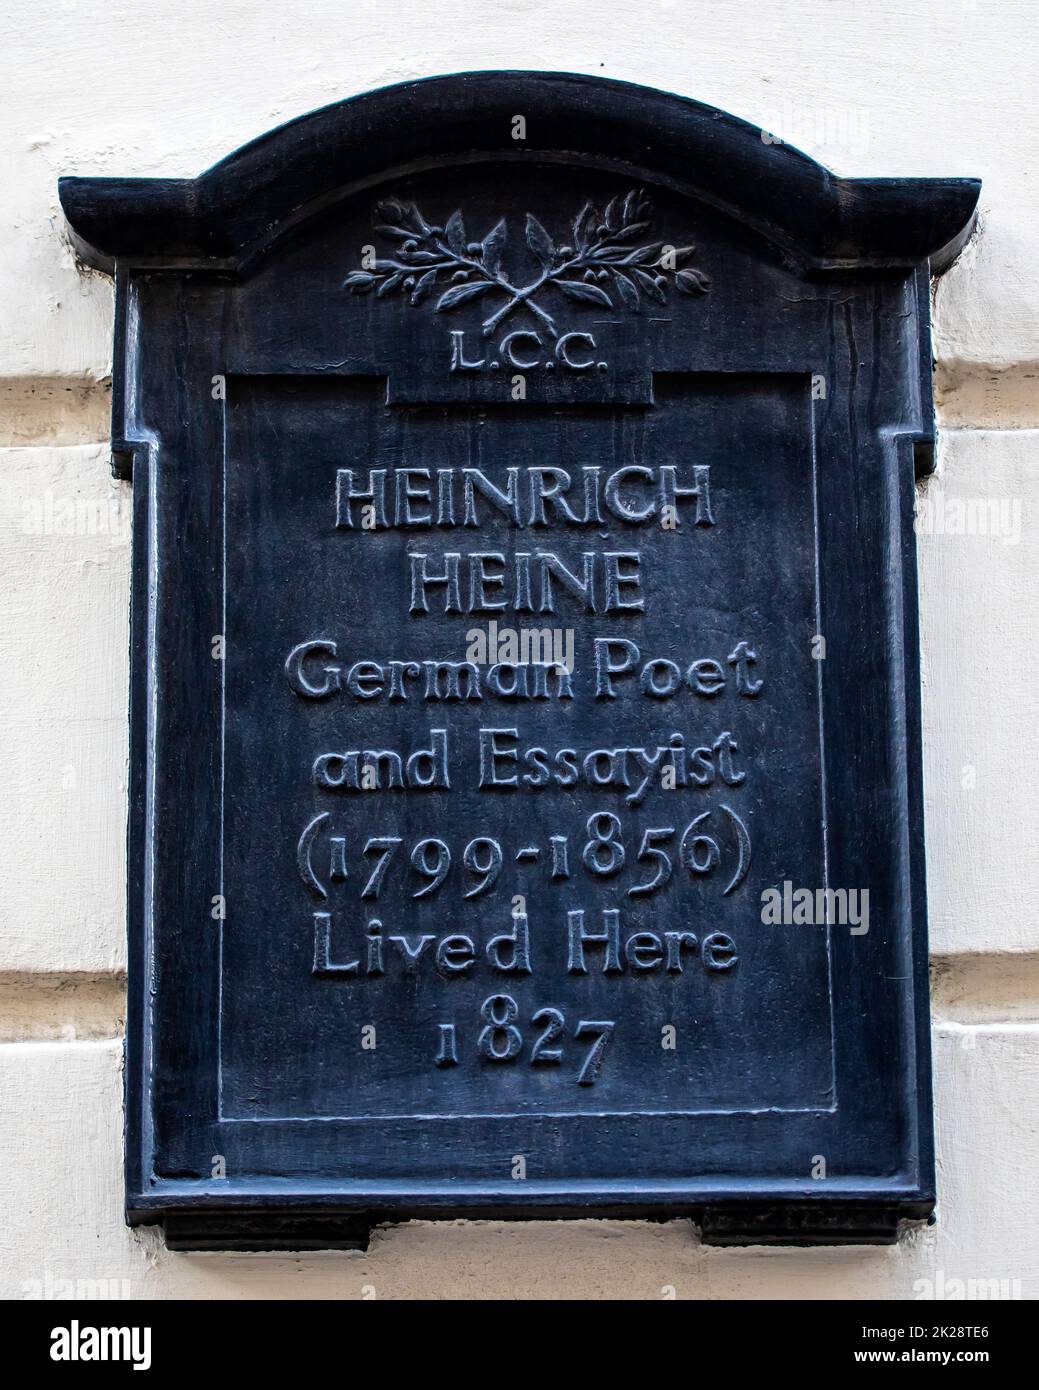 London, UK - September 14th 2022: A plaque on Craven Street in London, UK, marking the location where famous German poet and essayist Heinrich Heine o Stock Photo